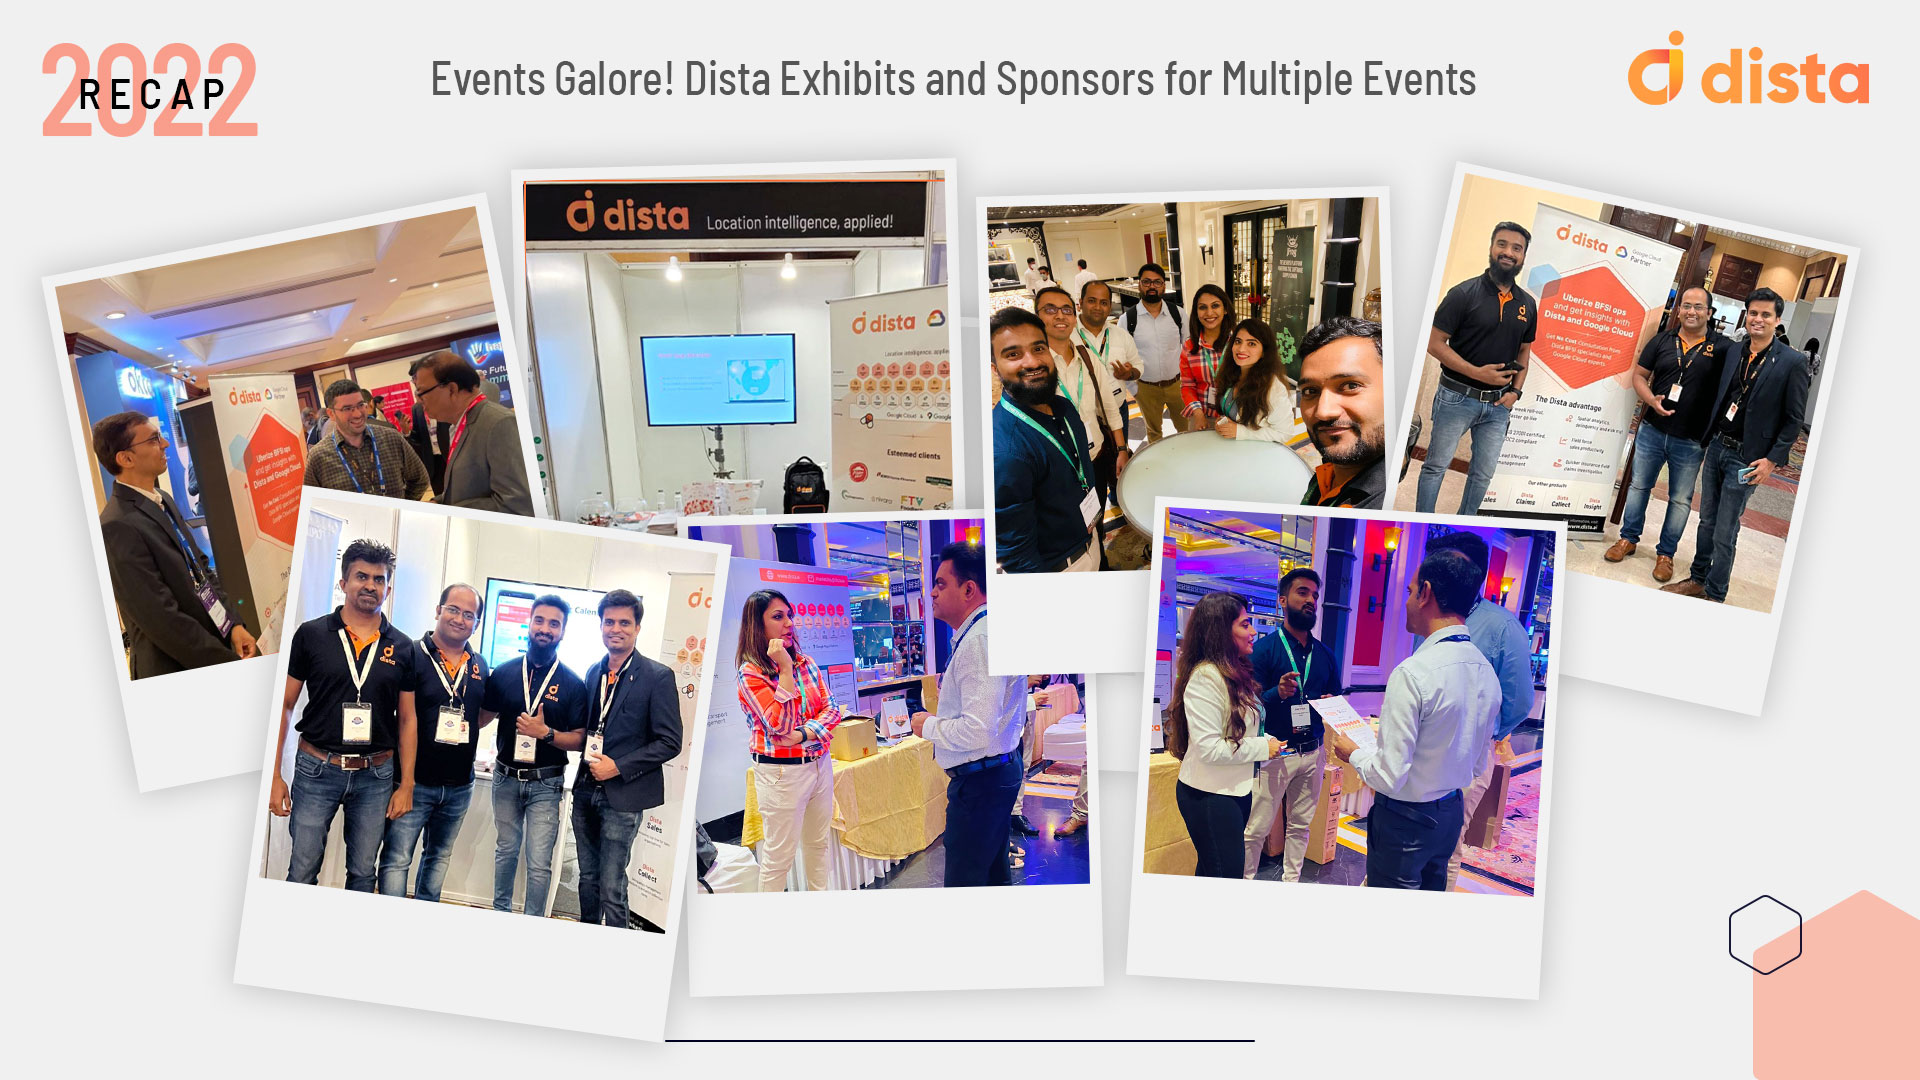 Events Galore! Dista Exhibits and Sponsors for Multiple Events